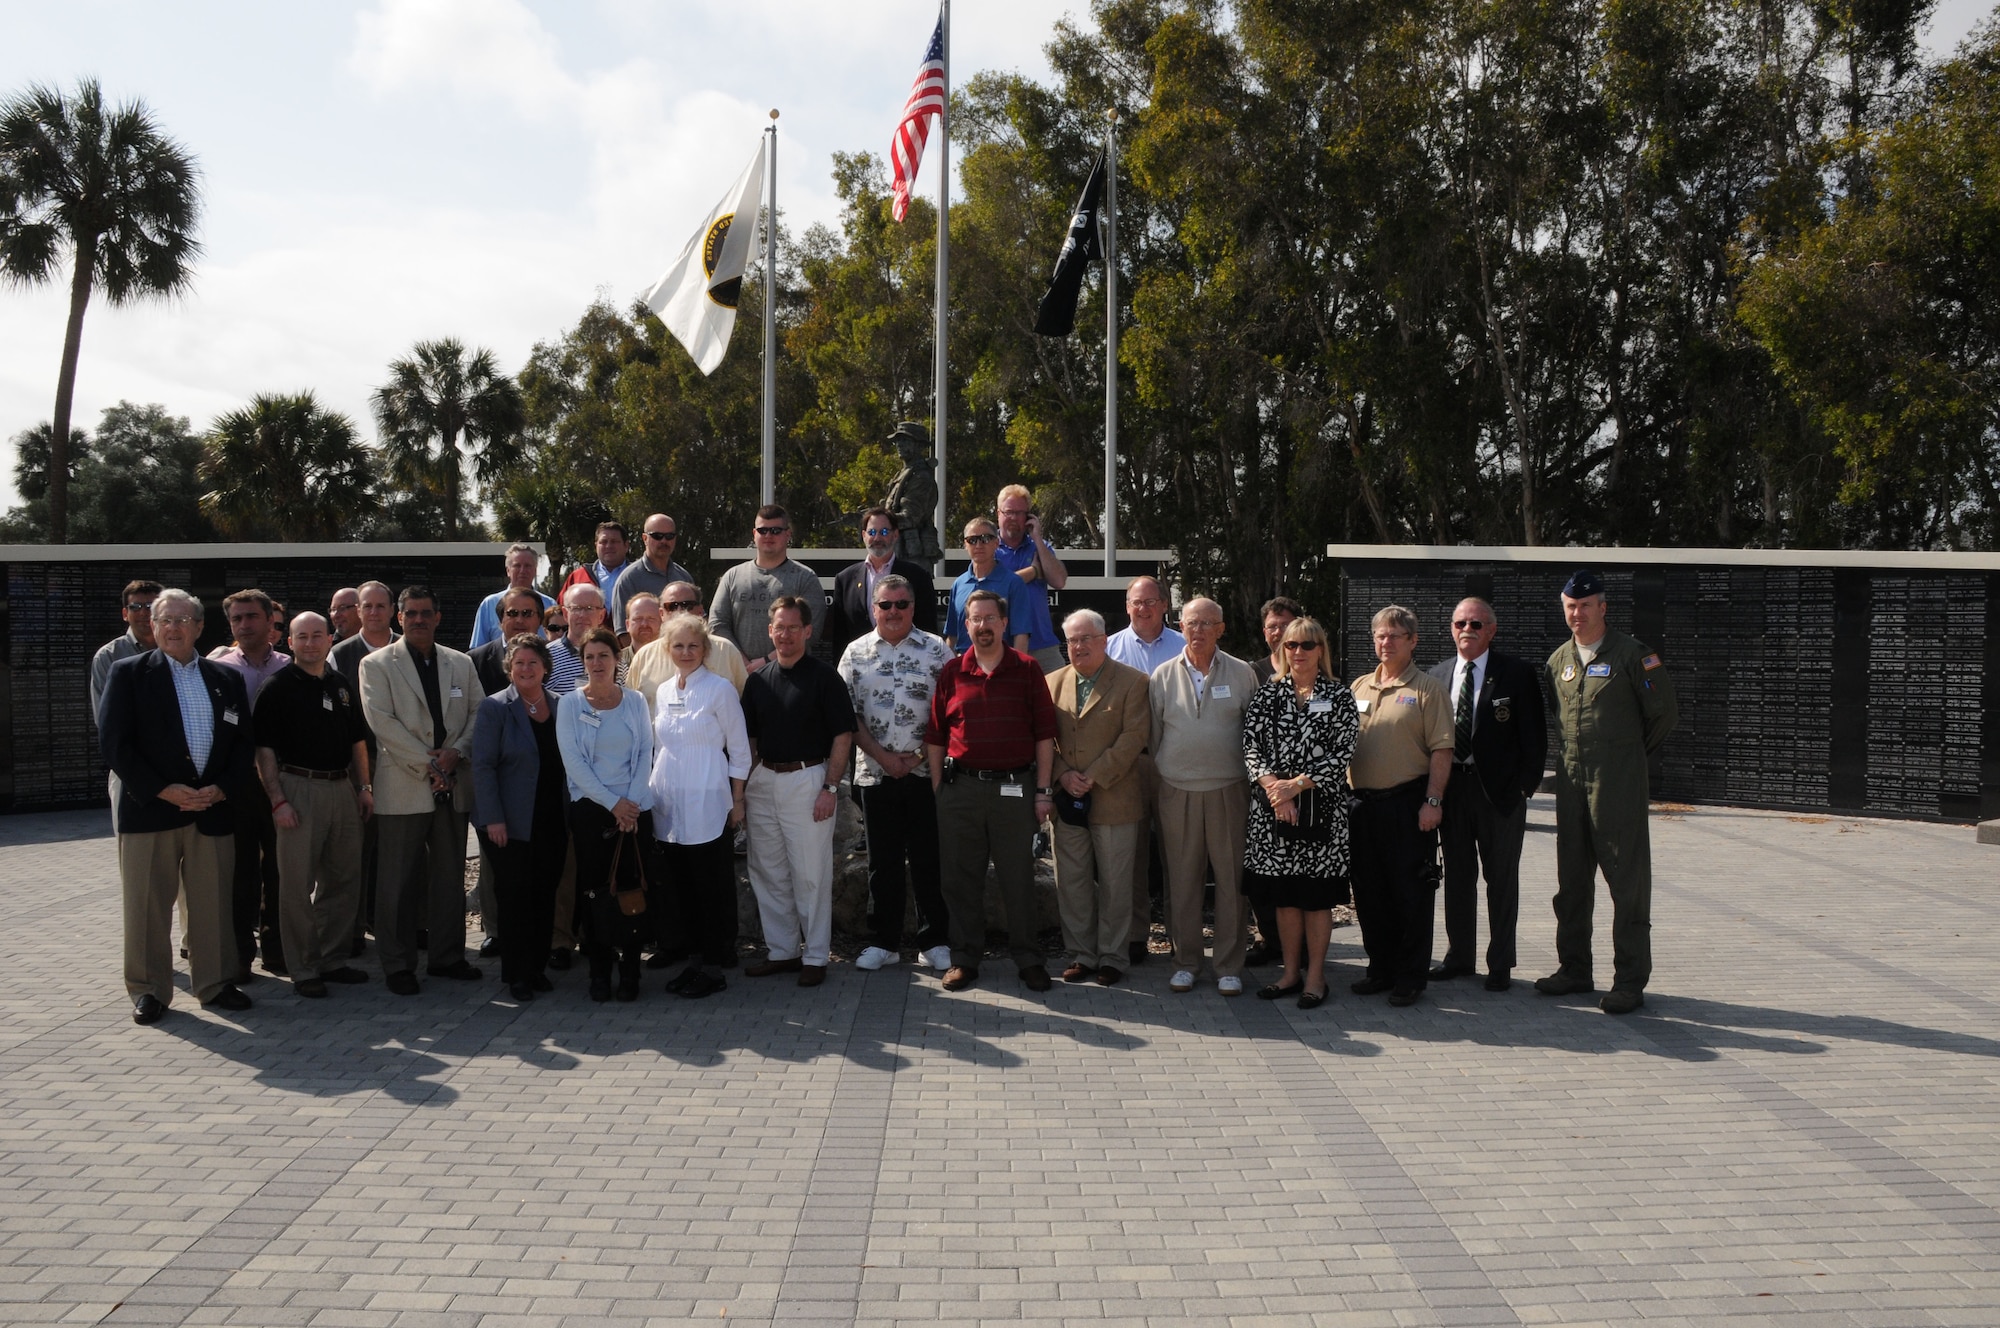 During a recent ESGR trip, local Niagara and Erie county employers had the opportunity to tour The United States Special Operations Command at MacDill Air Force Base, Tampa Fla. Above the group posed in front of The Special Operations Memorial located at MacDill AFB. The Memorial honors Special Operation members that have paid the ultimate price in preserving the freedoms and liberties that all Americans have become accustomed to. (U.S. Air Force photo/Senior Master Sgt. Ray Lloyd)